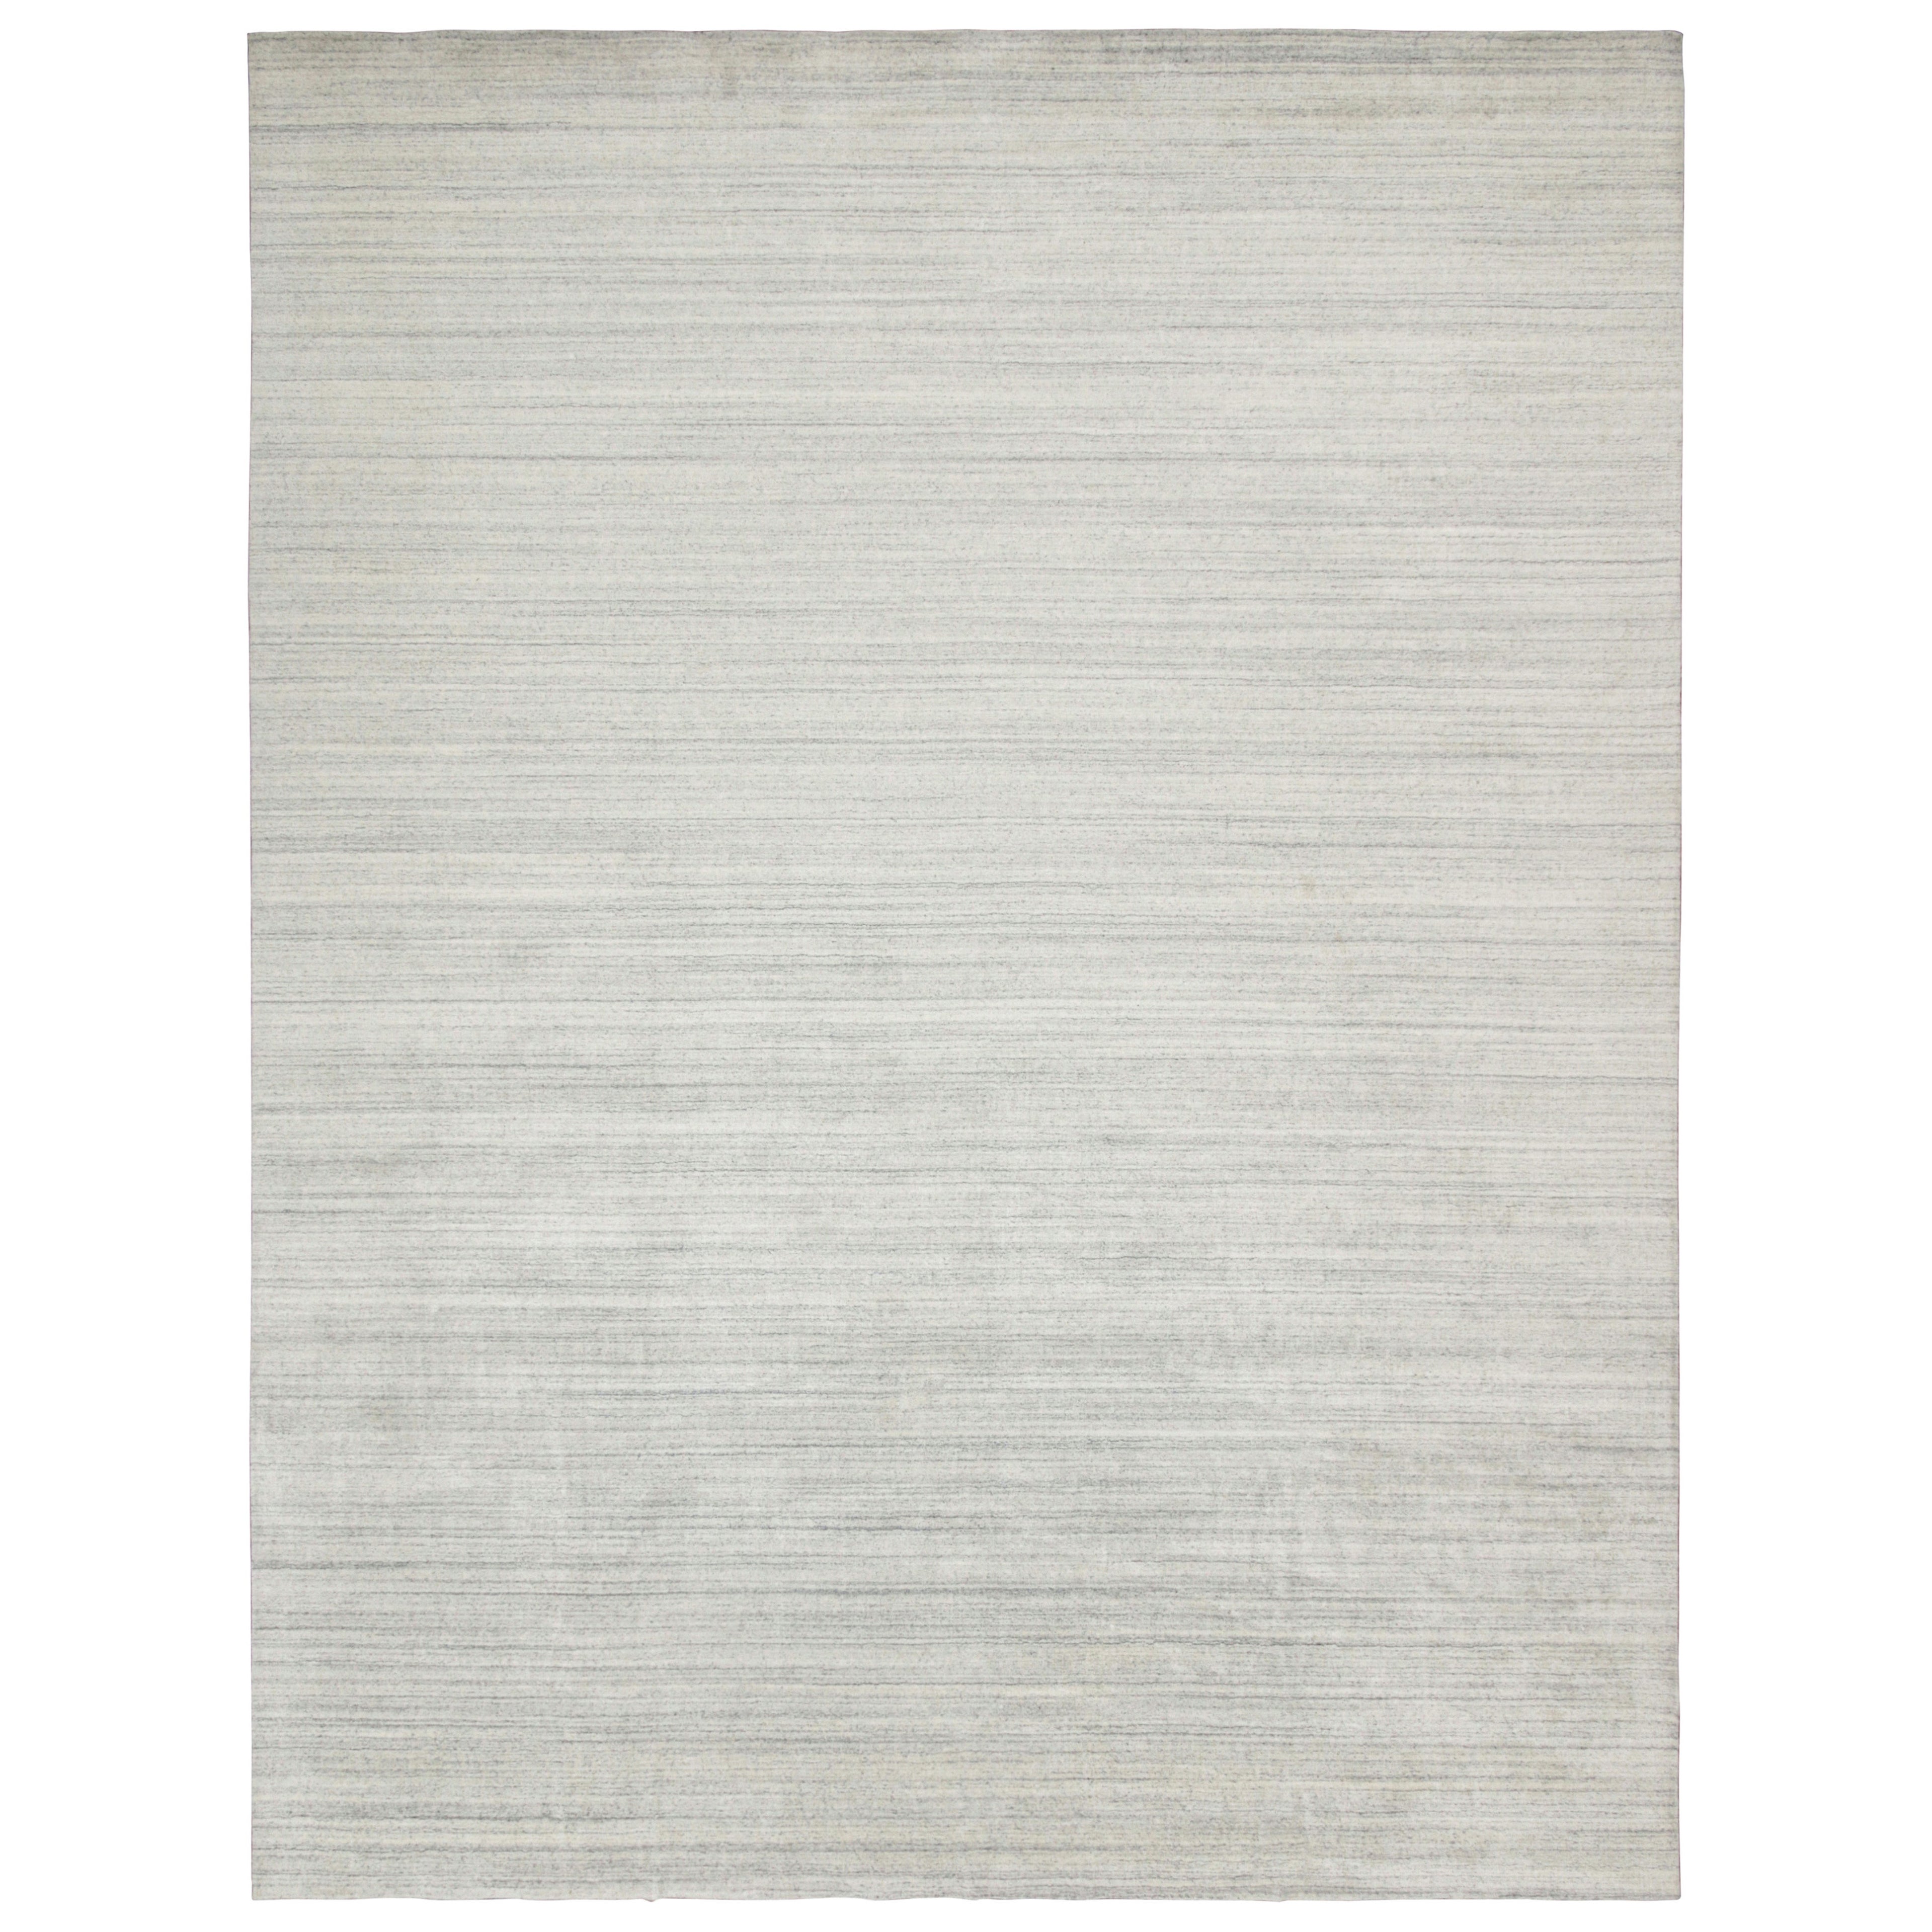 Rug & Kilim’s Contemporary Rug in Textural Silver, Off-White and Blue Striae